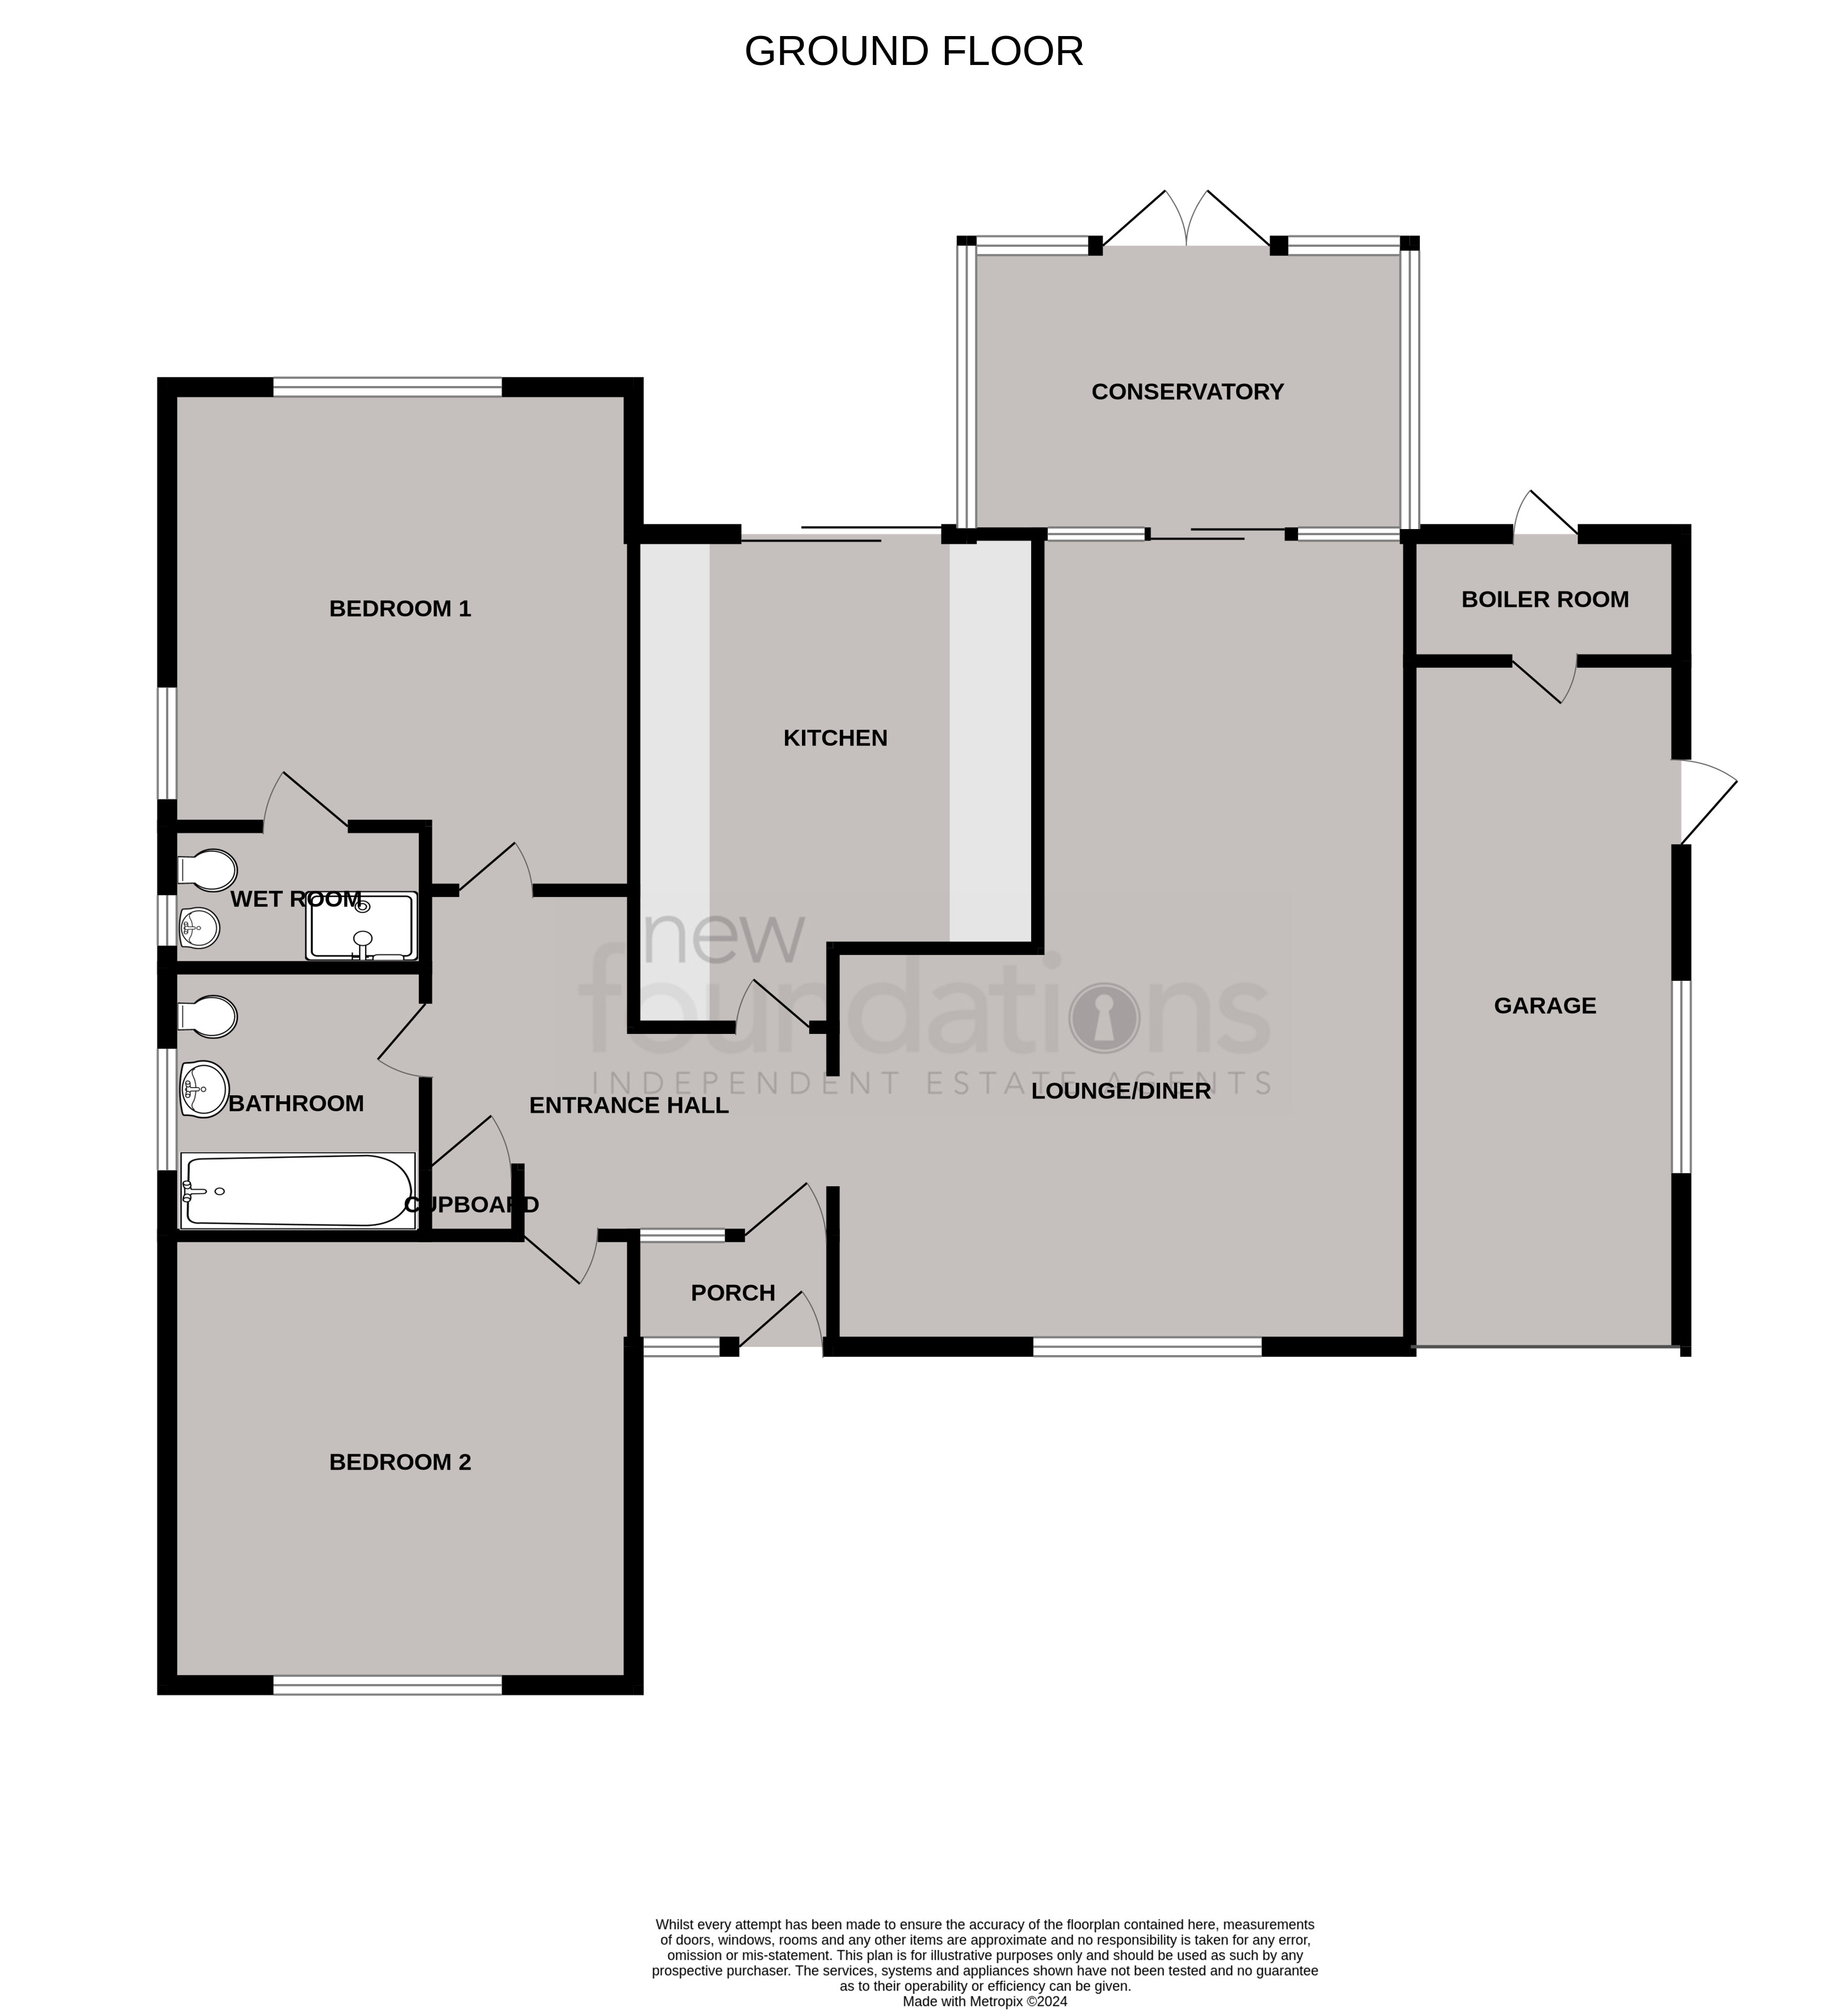 Floorplans For The Barnhams, Bexhill-on-Sea, East Sussex